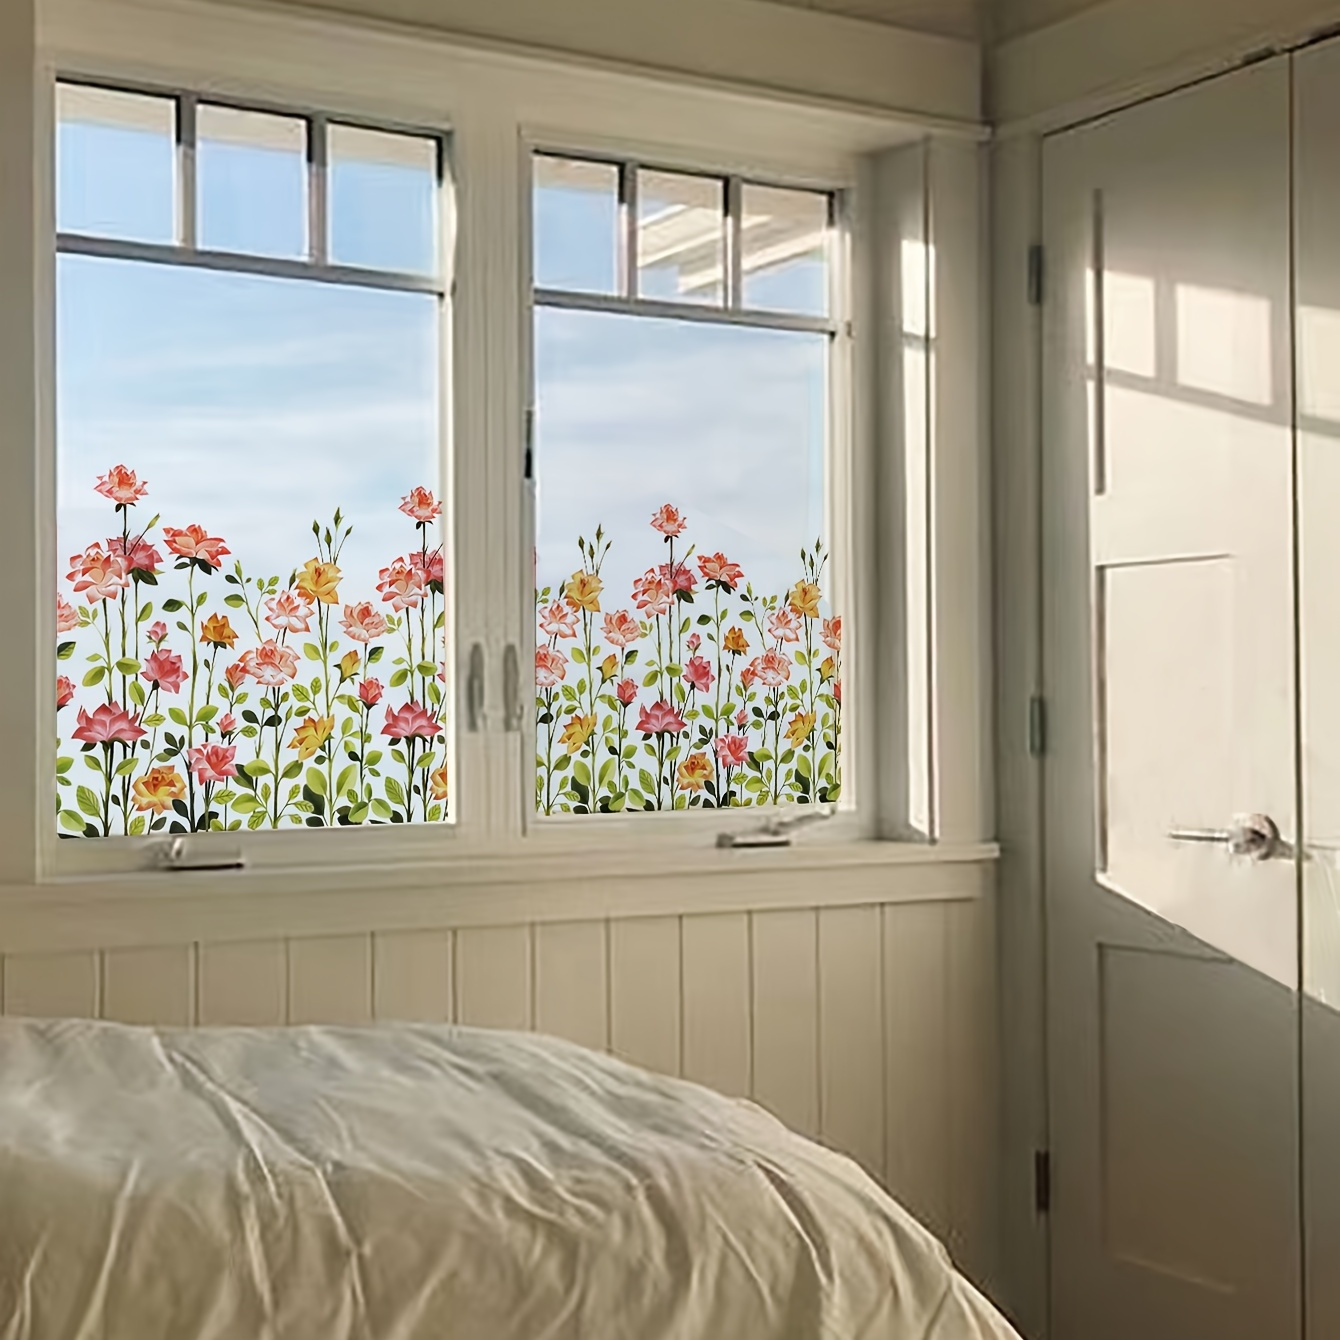 

1pc Floral Print Electrostatic Window Film - Enhance Your Home Decor With A Beautiful Flower Theme